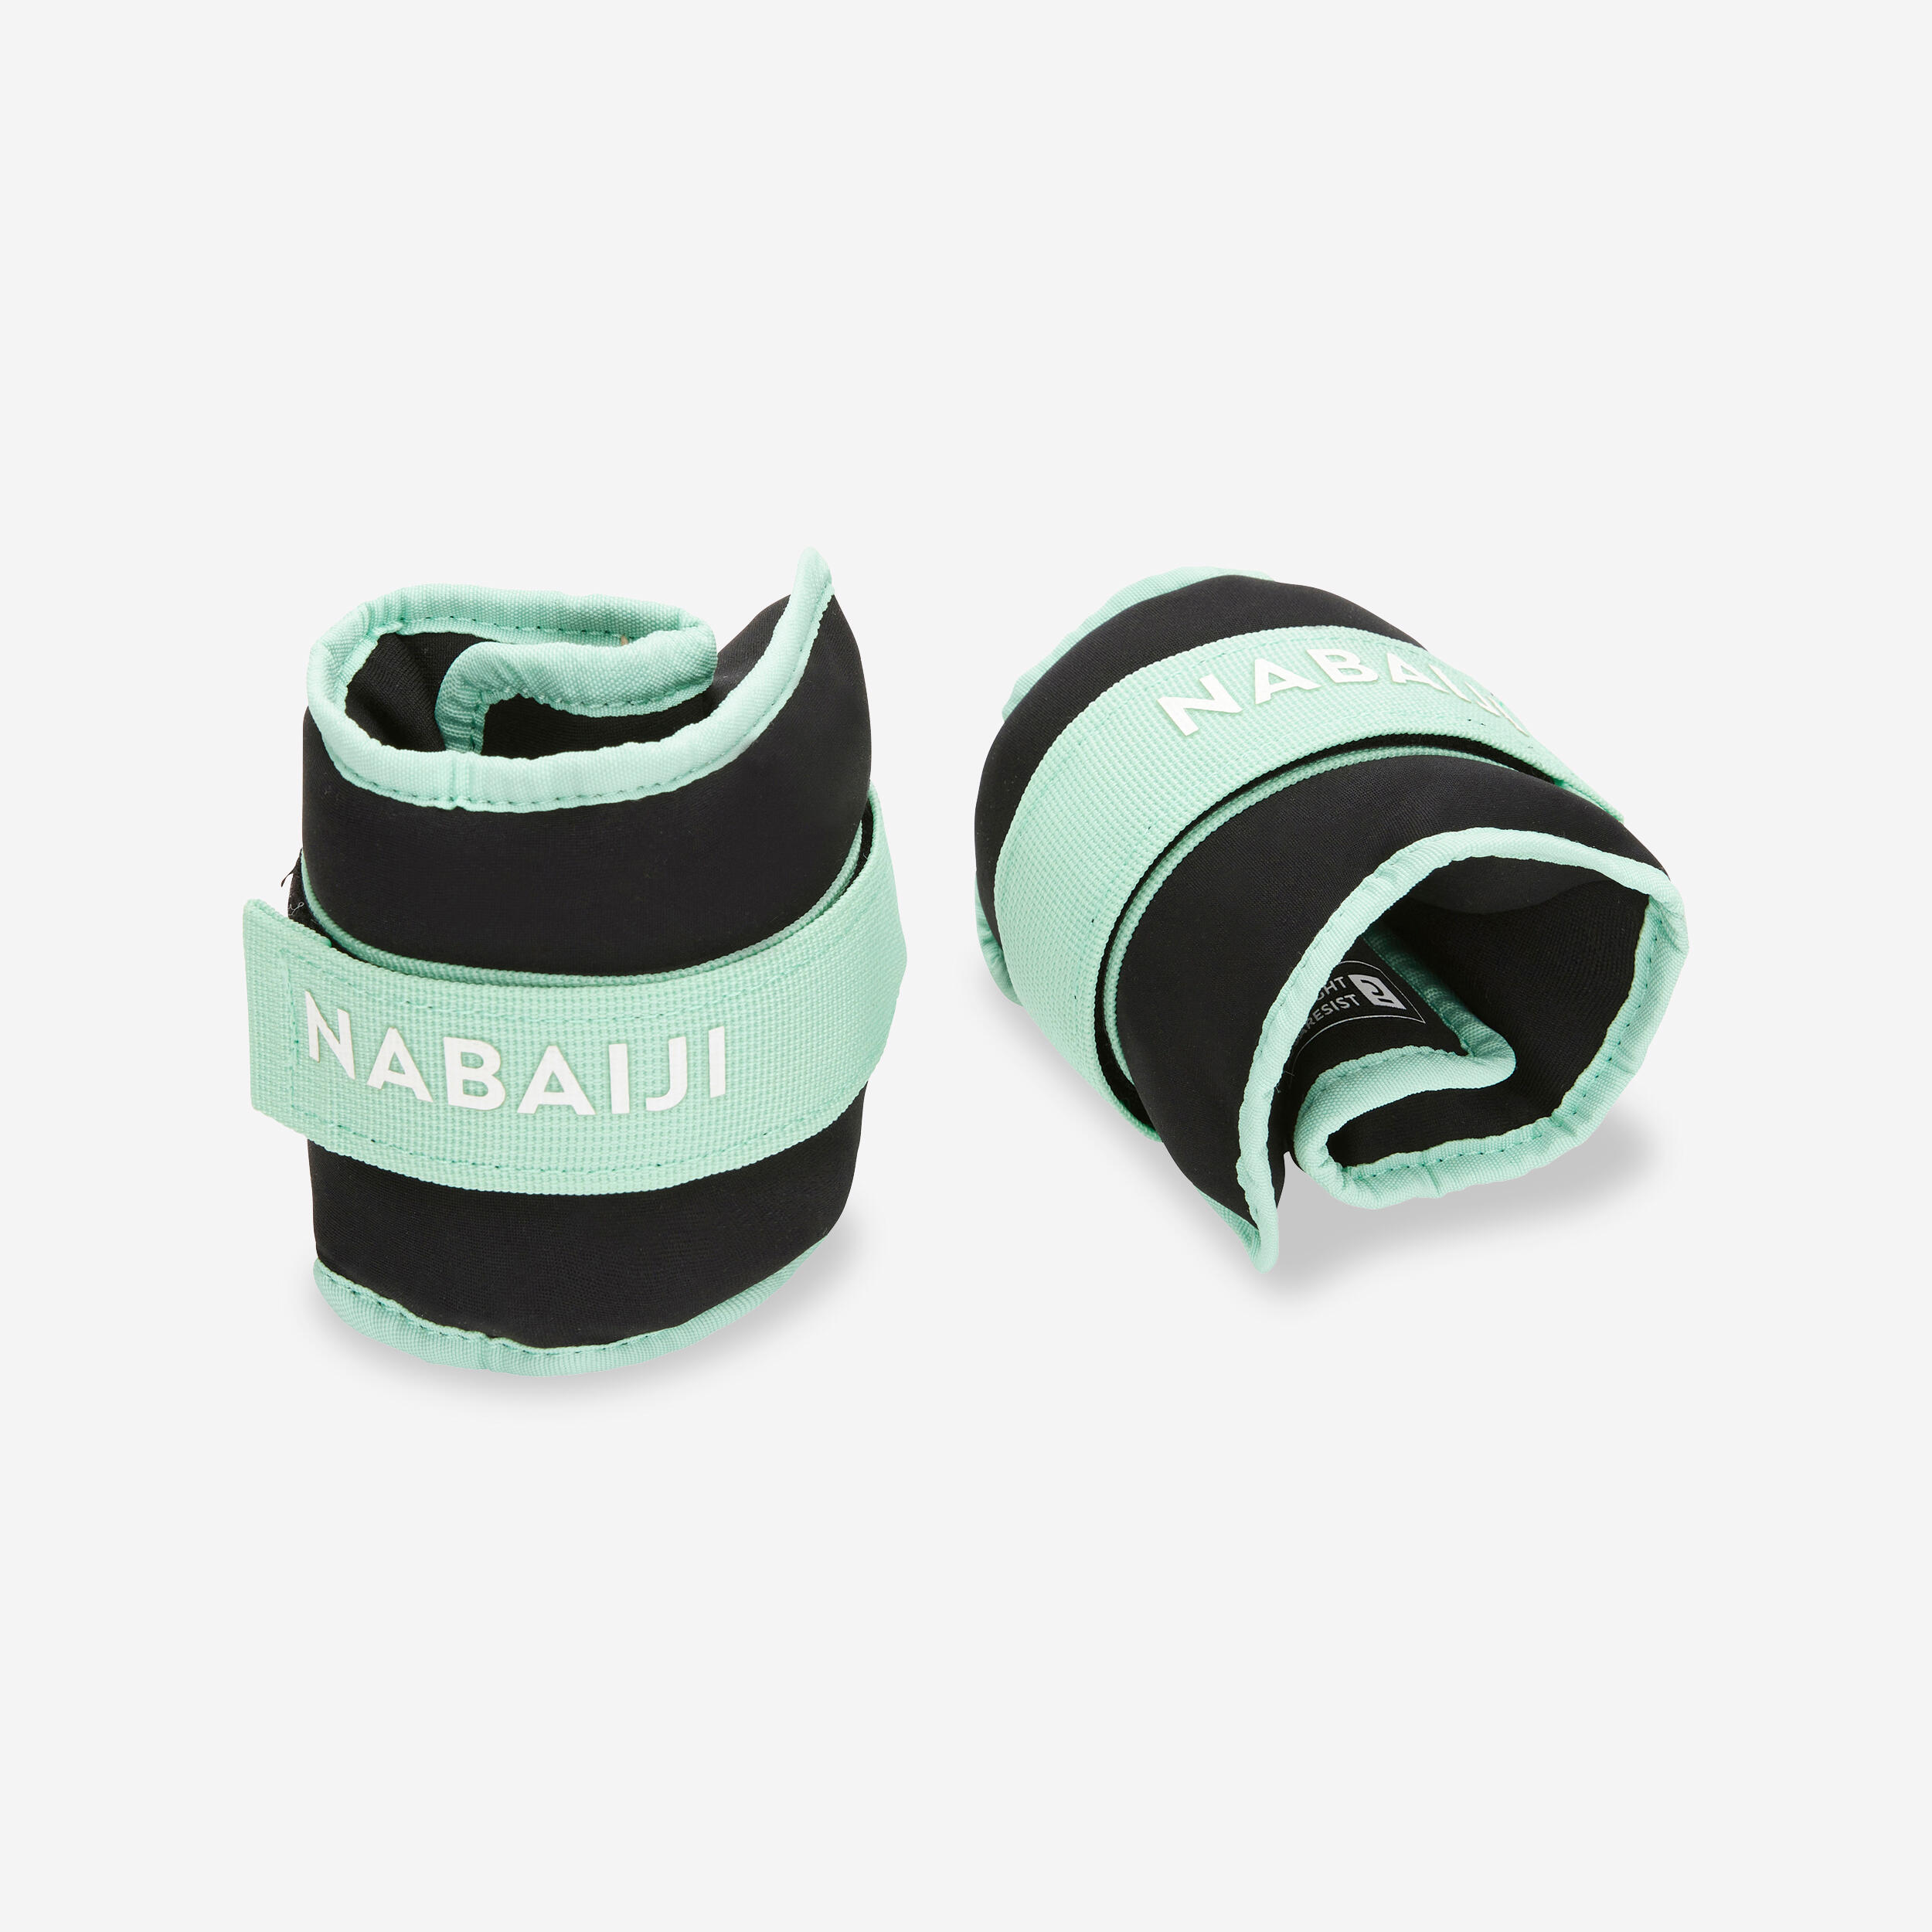 Aquafit weighted bands with strap - light green. 2*0.5KG 1/10